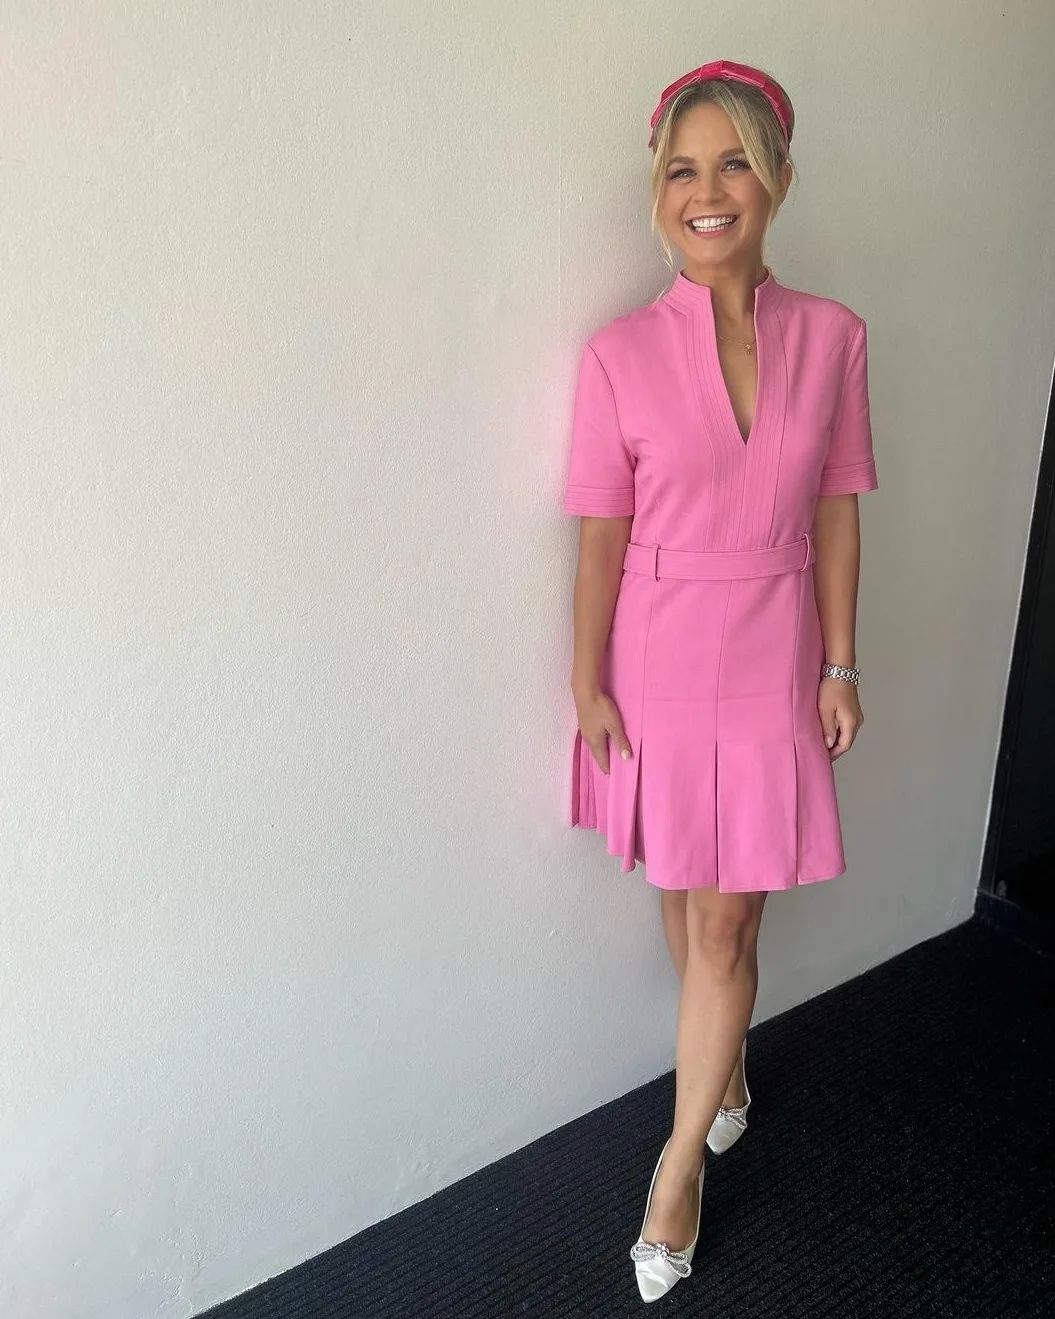 Emma Freedman looking lovely in our 